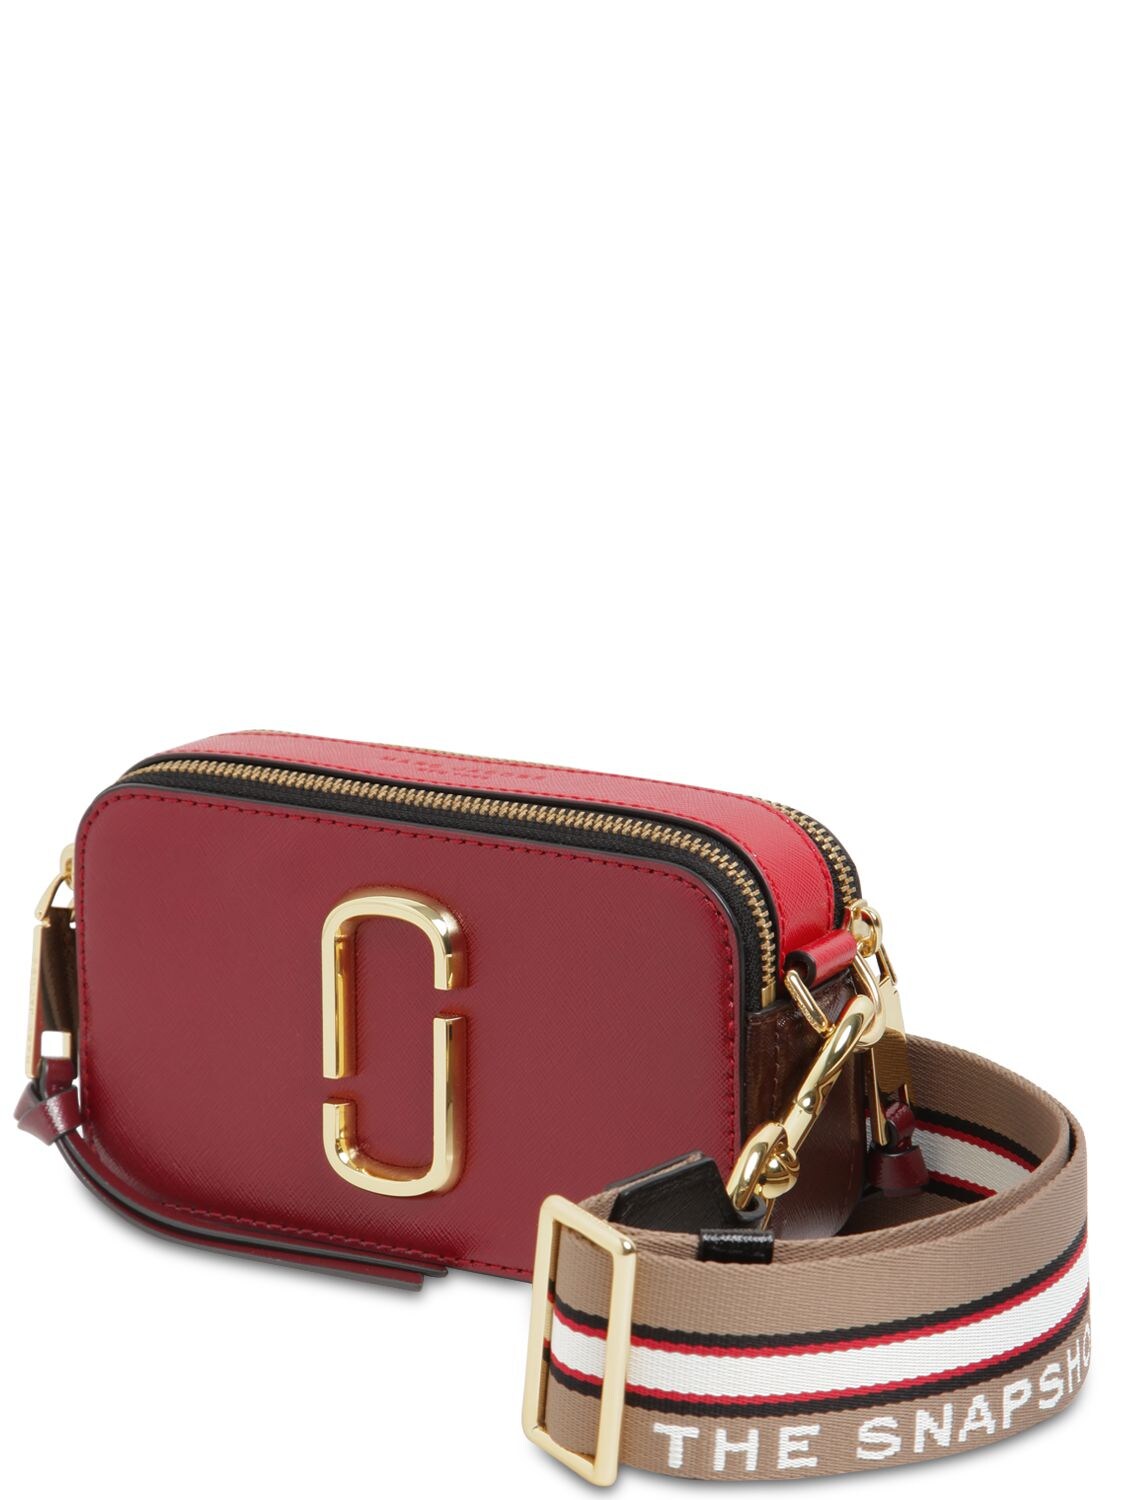 Marc Jacobs Snapshot Leather Shoulder Bag In Cramberry